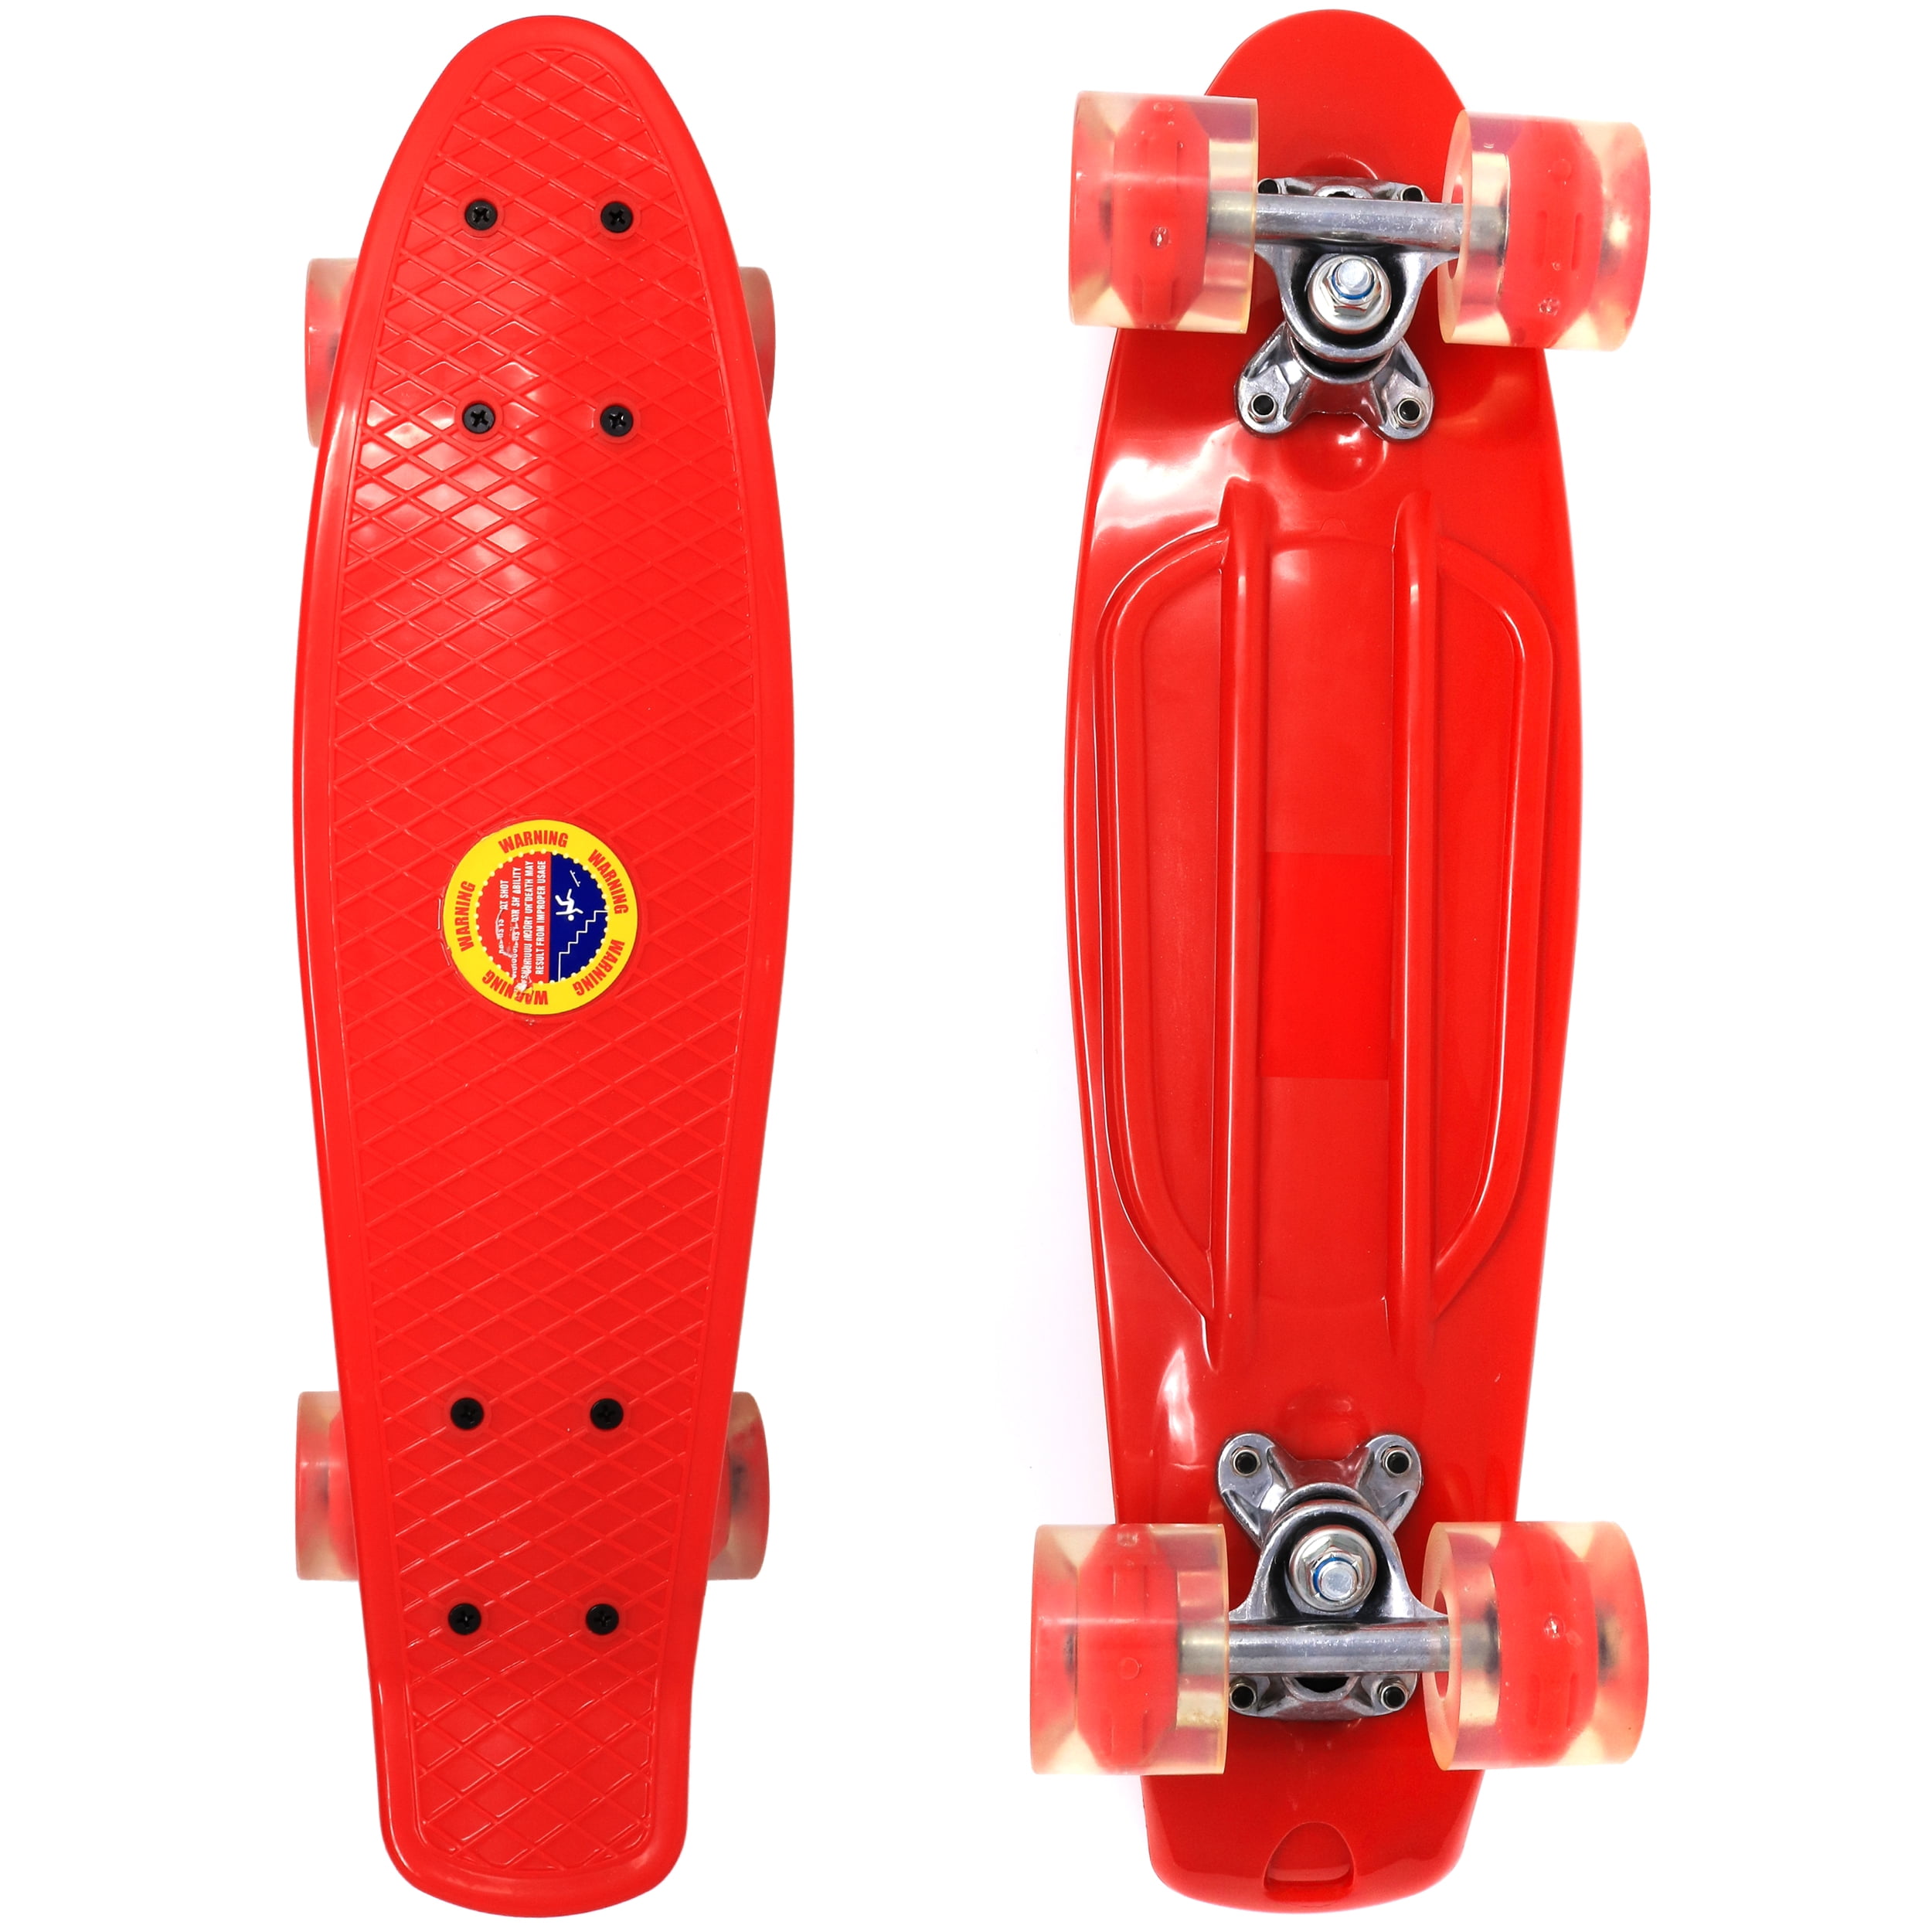 LED 22 Inch Skateboard w/ 4 Different Light Modes and Light Up Wheels Red 